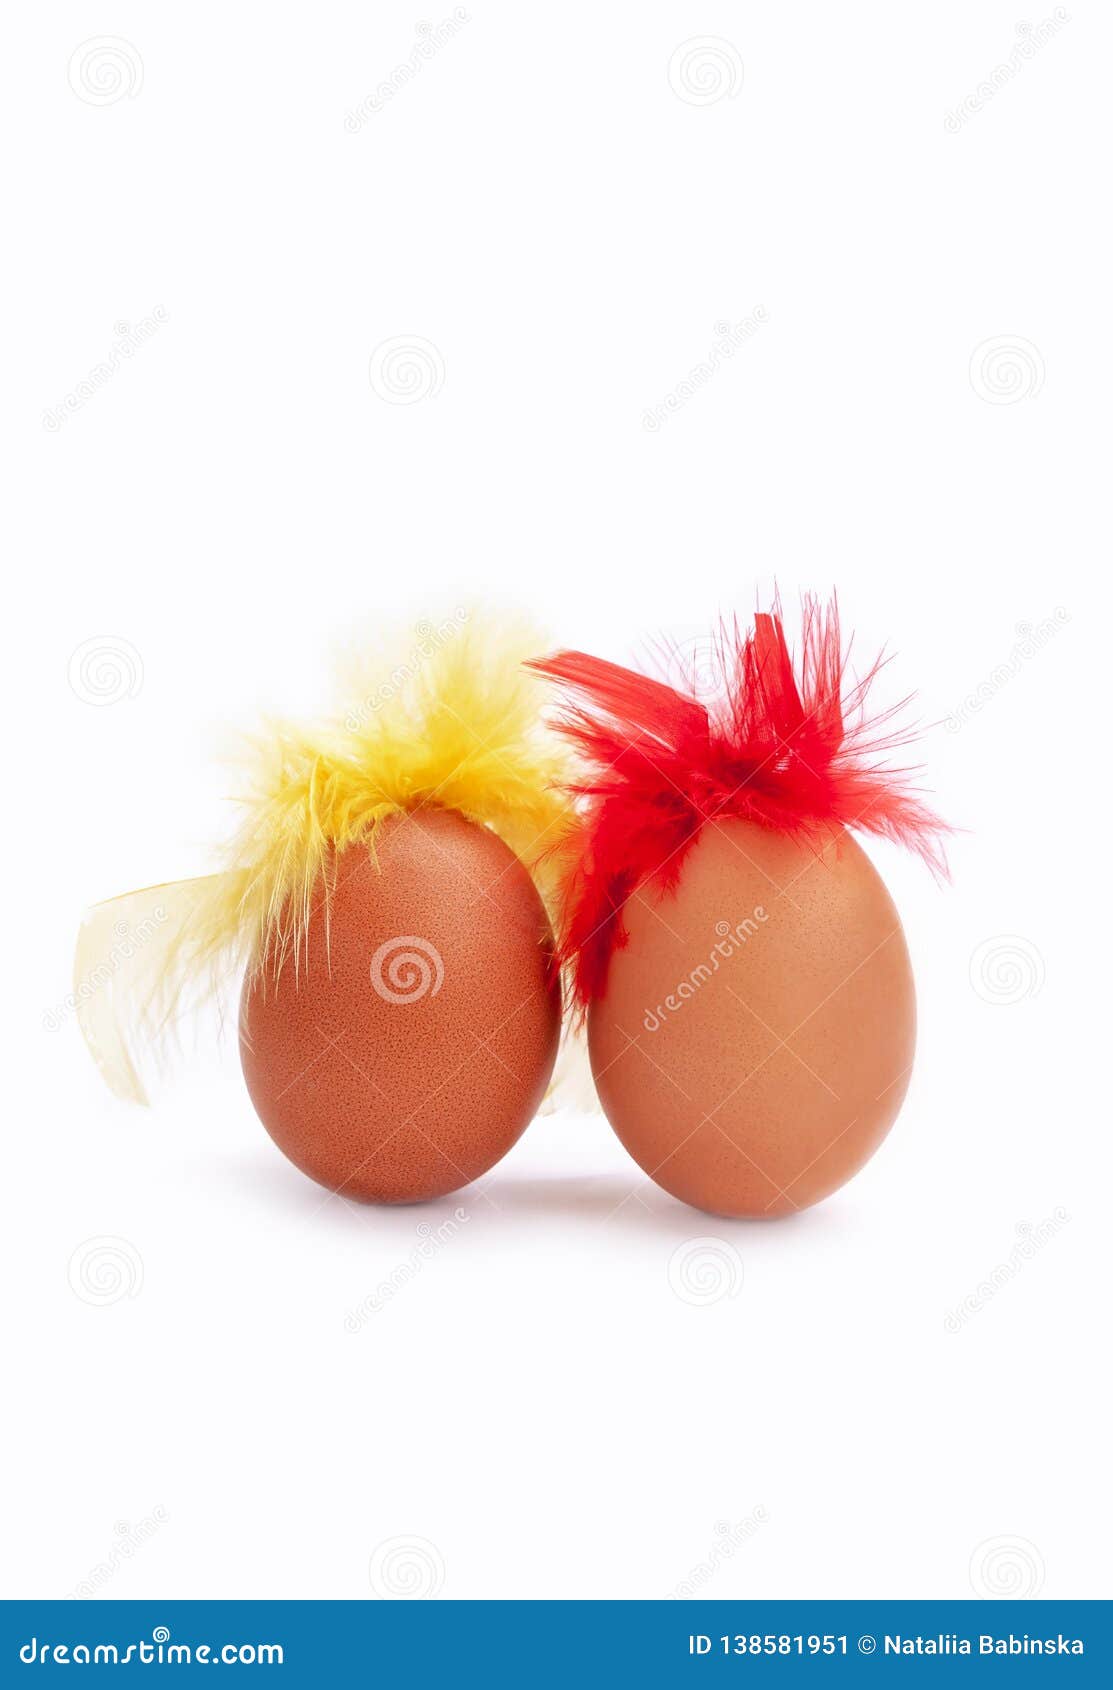 Chicken Eggs White Background Egg Red Yellow Feathers Isoiated Hair Brown  Gag Two Stock Image - Image of food, decoration: 138581951